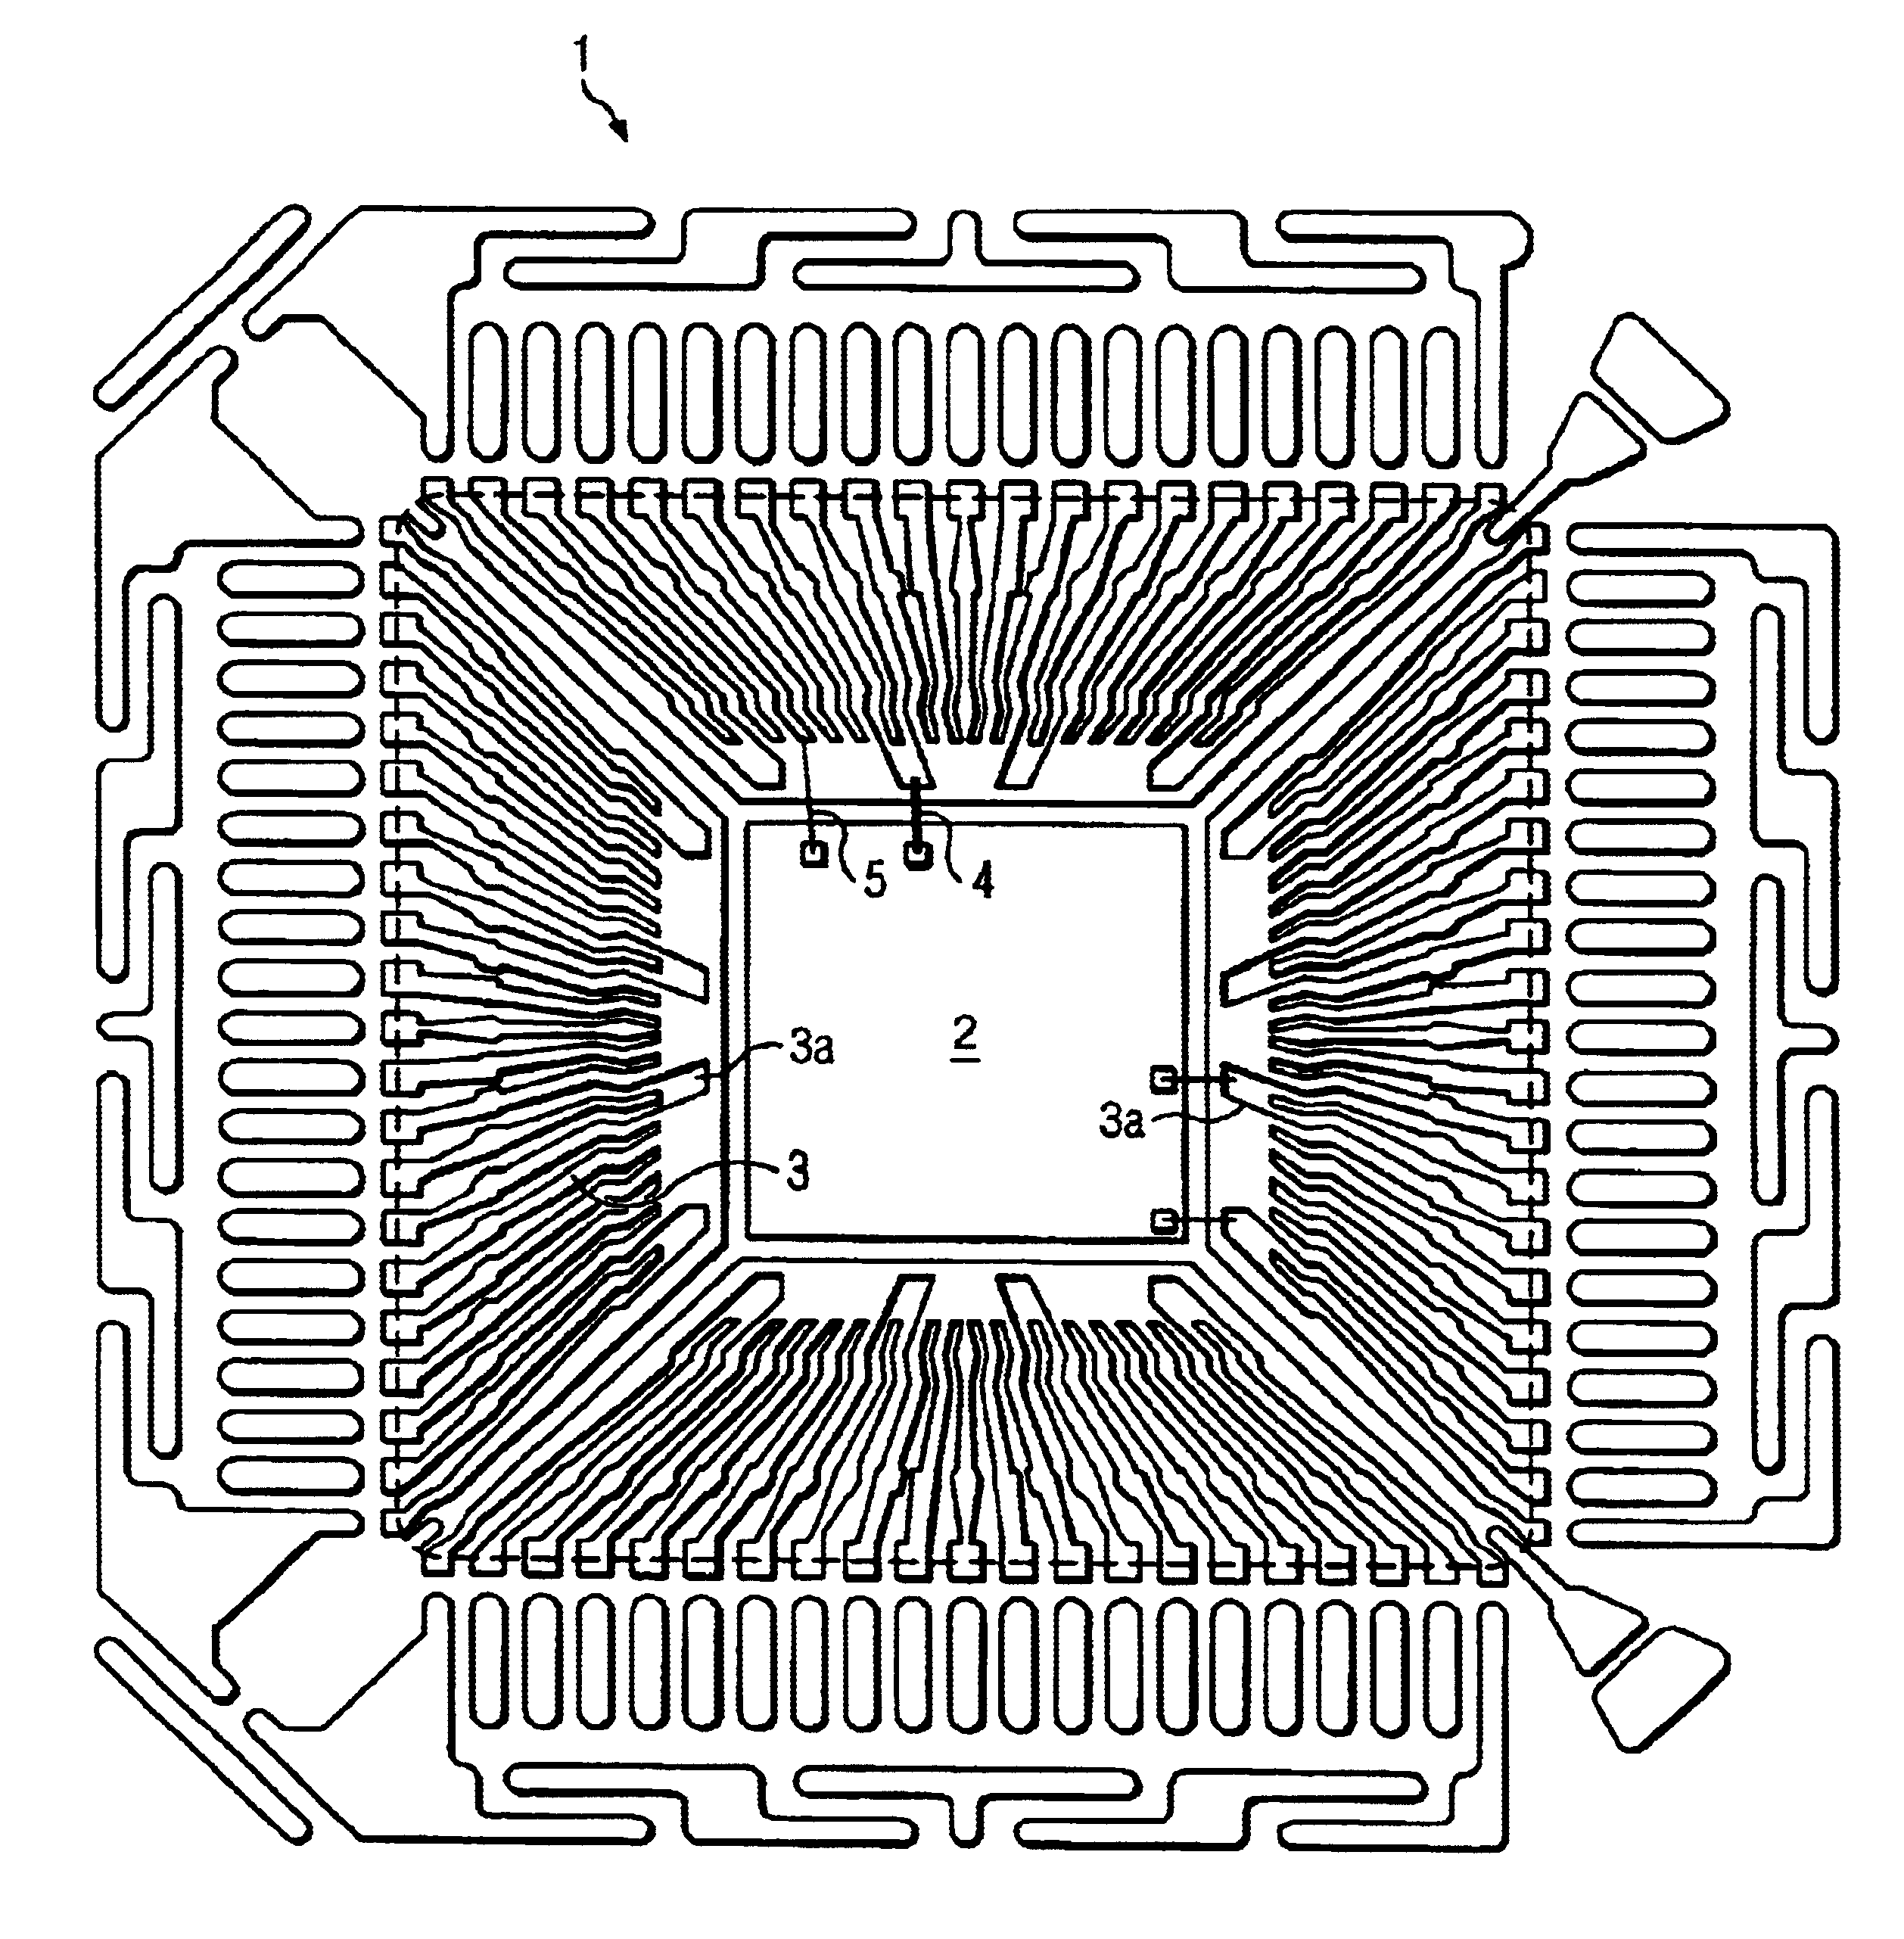 Leadframe for integrated circuit chips having low resistance connections